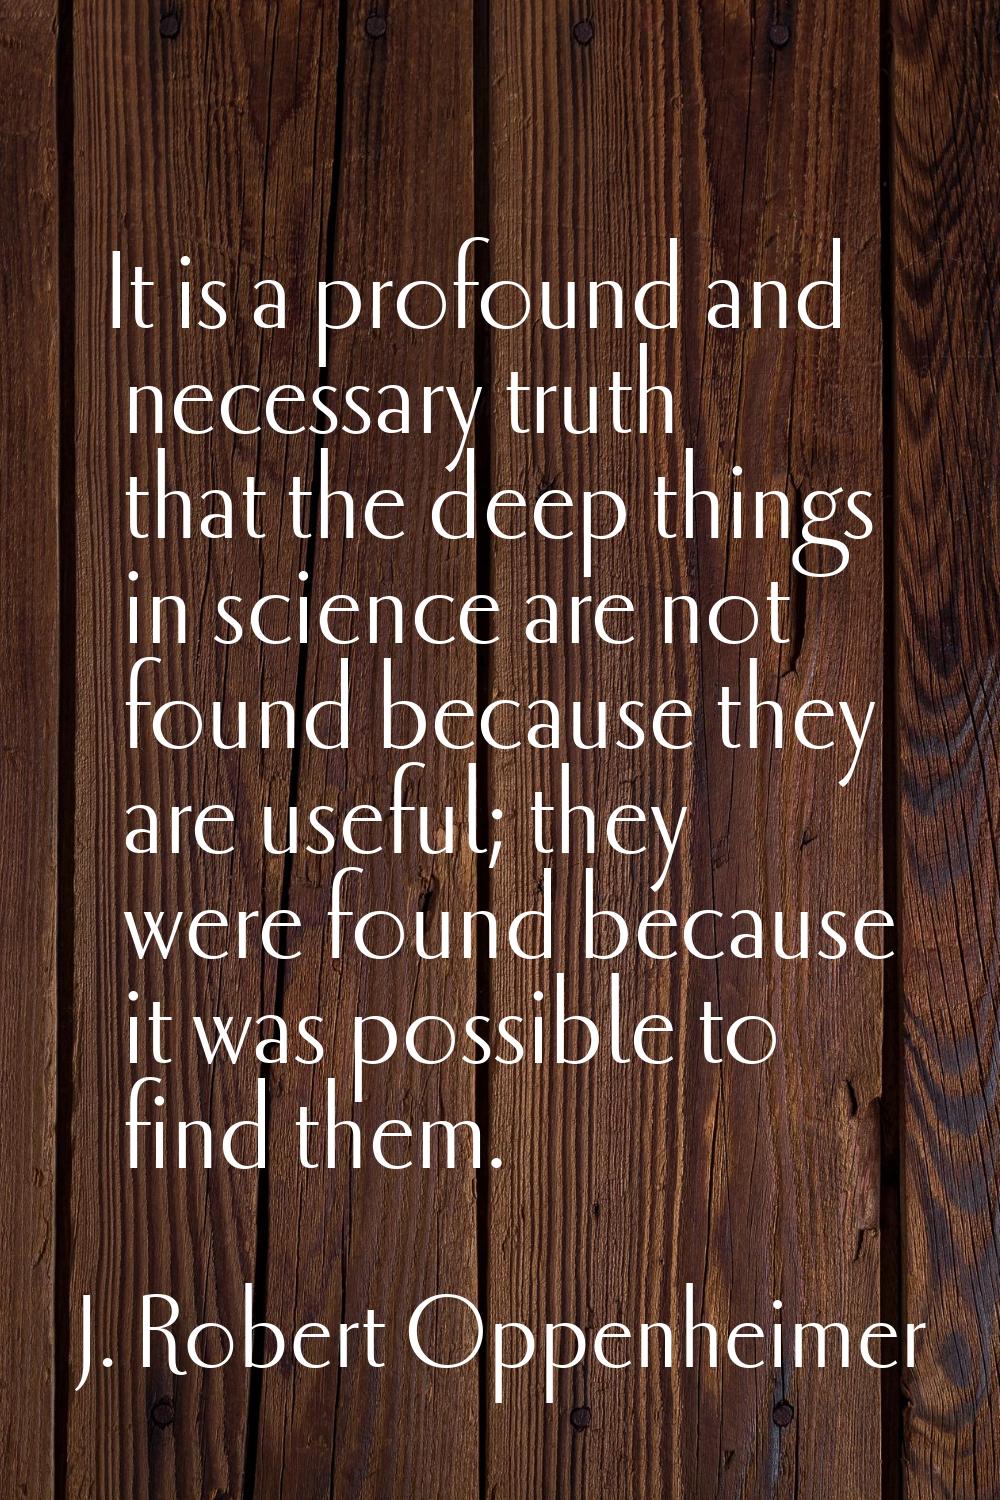 It is a profound and necessary truth that the deep things in science are not found because they are